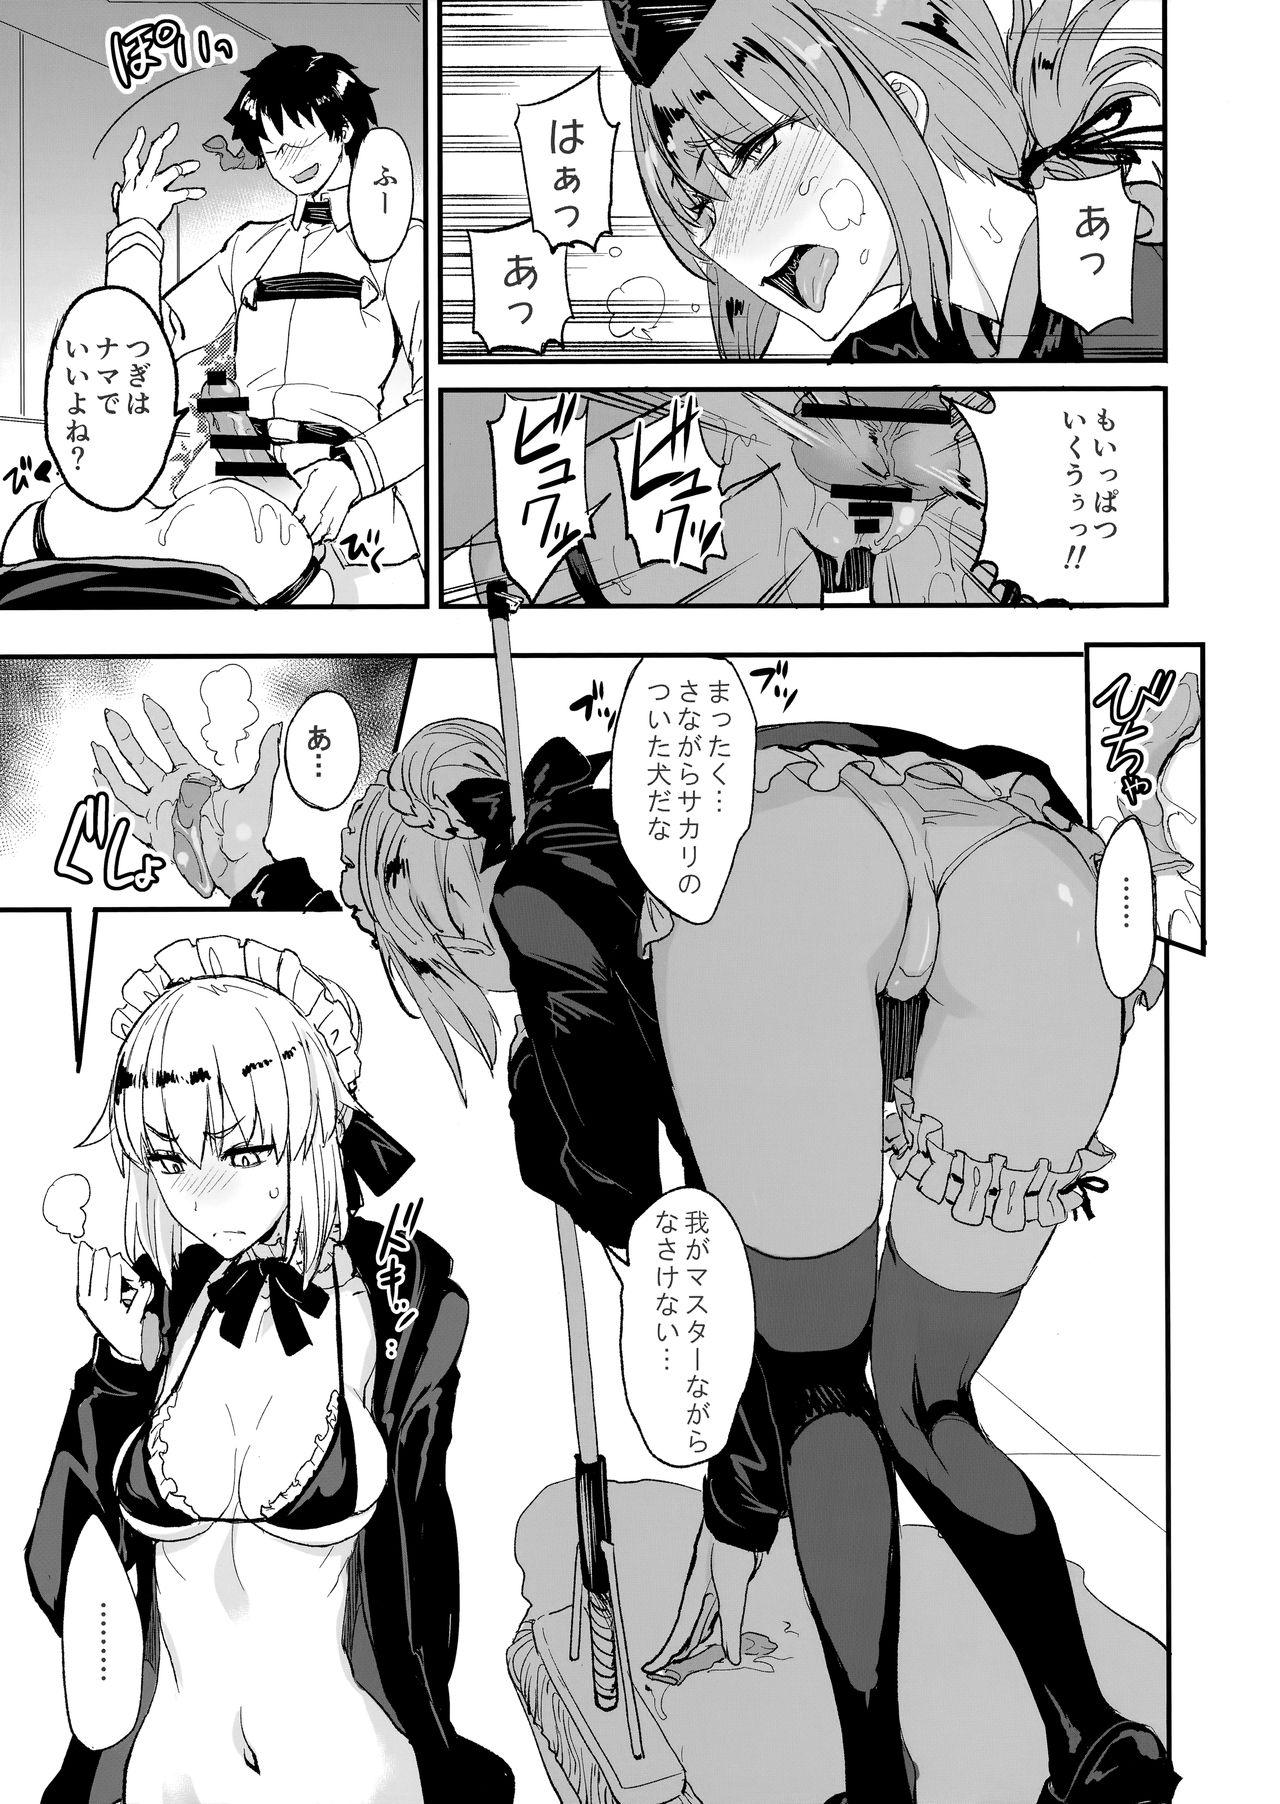 Eng Sub FGO no Erohon 2 - Fate grand order Ball Busting - Page 8